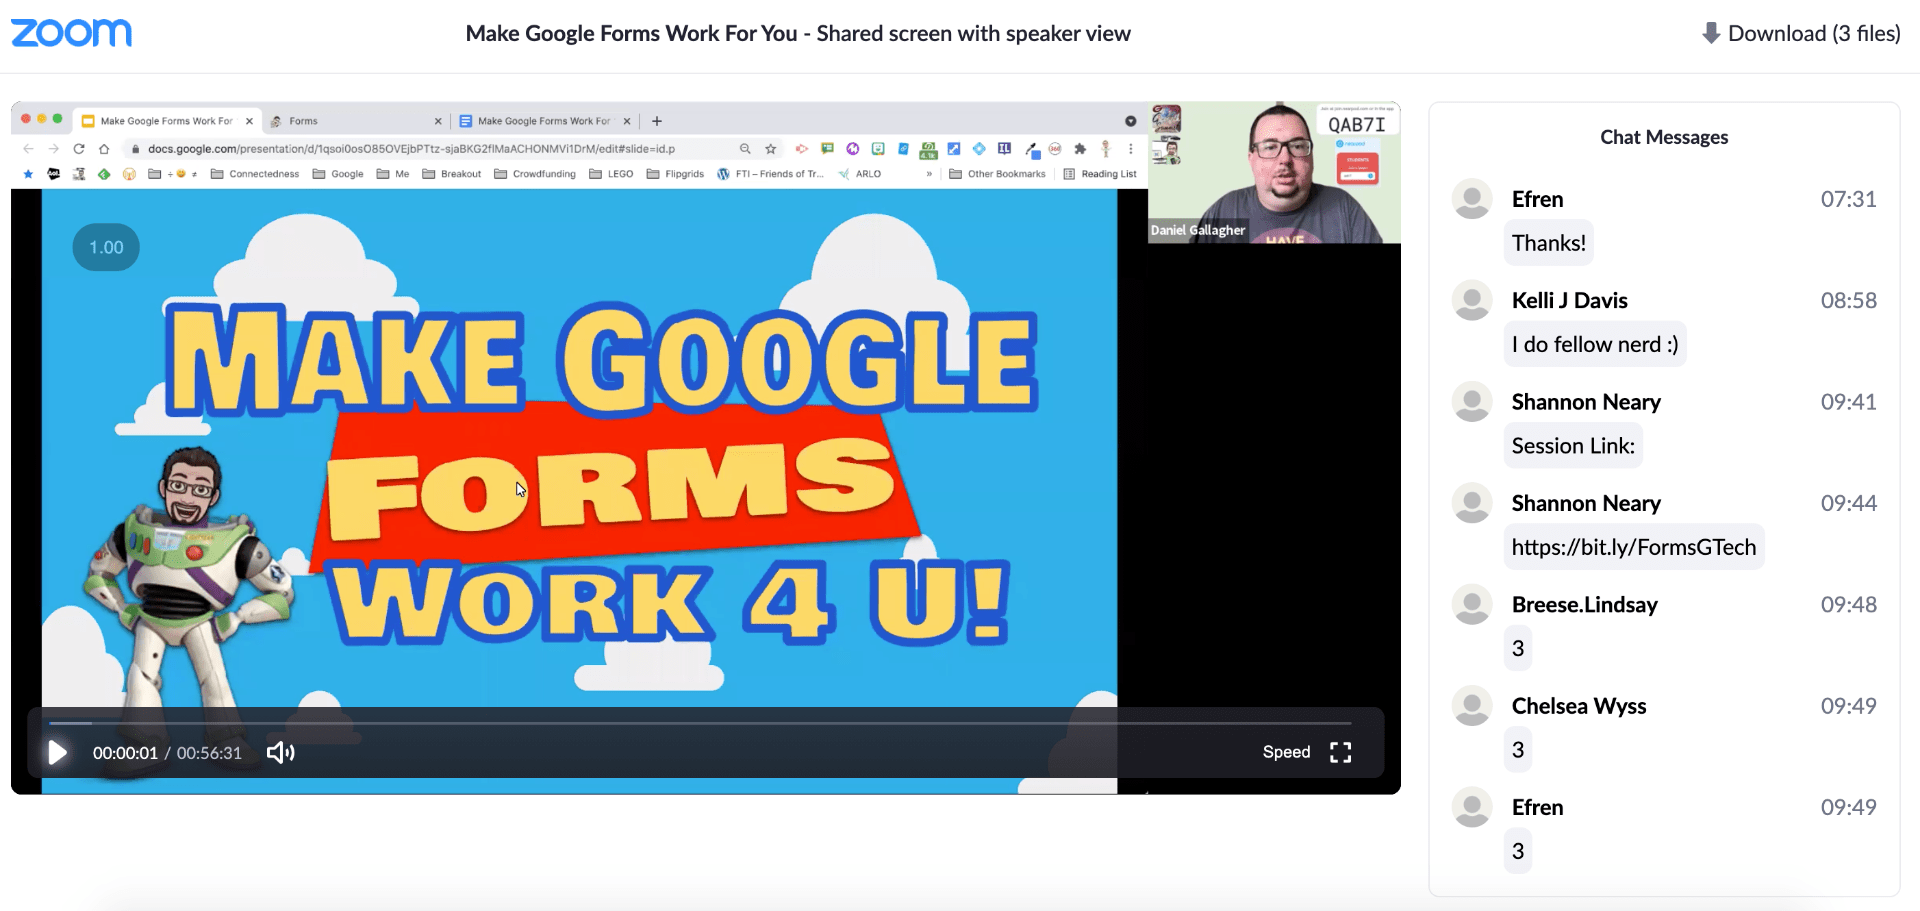 Make Google Forms Work for You